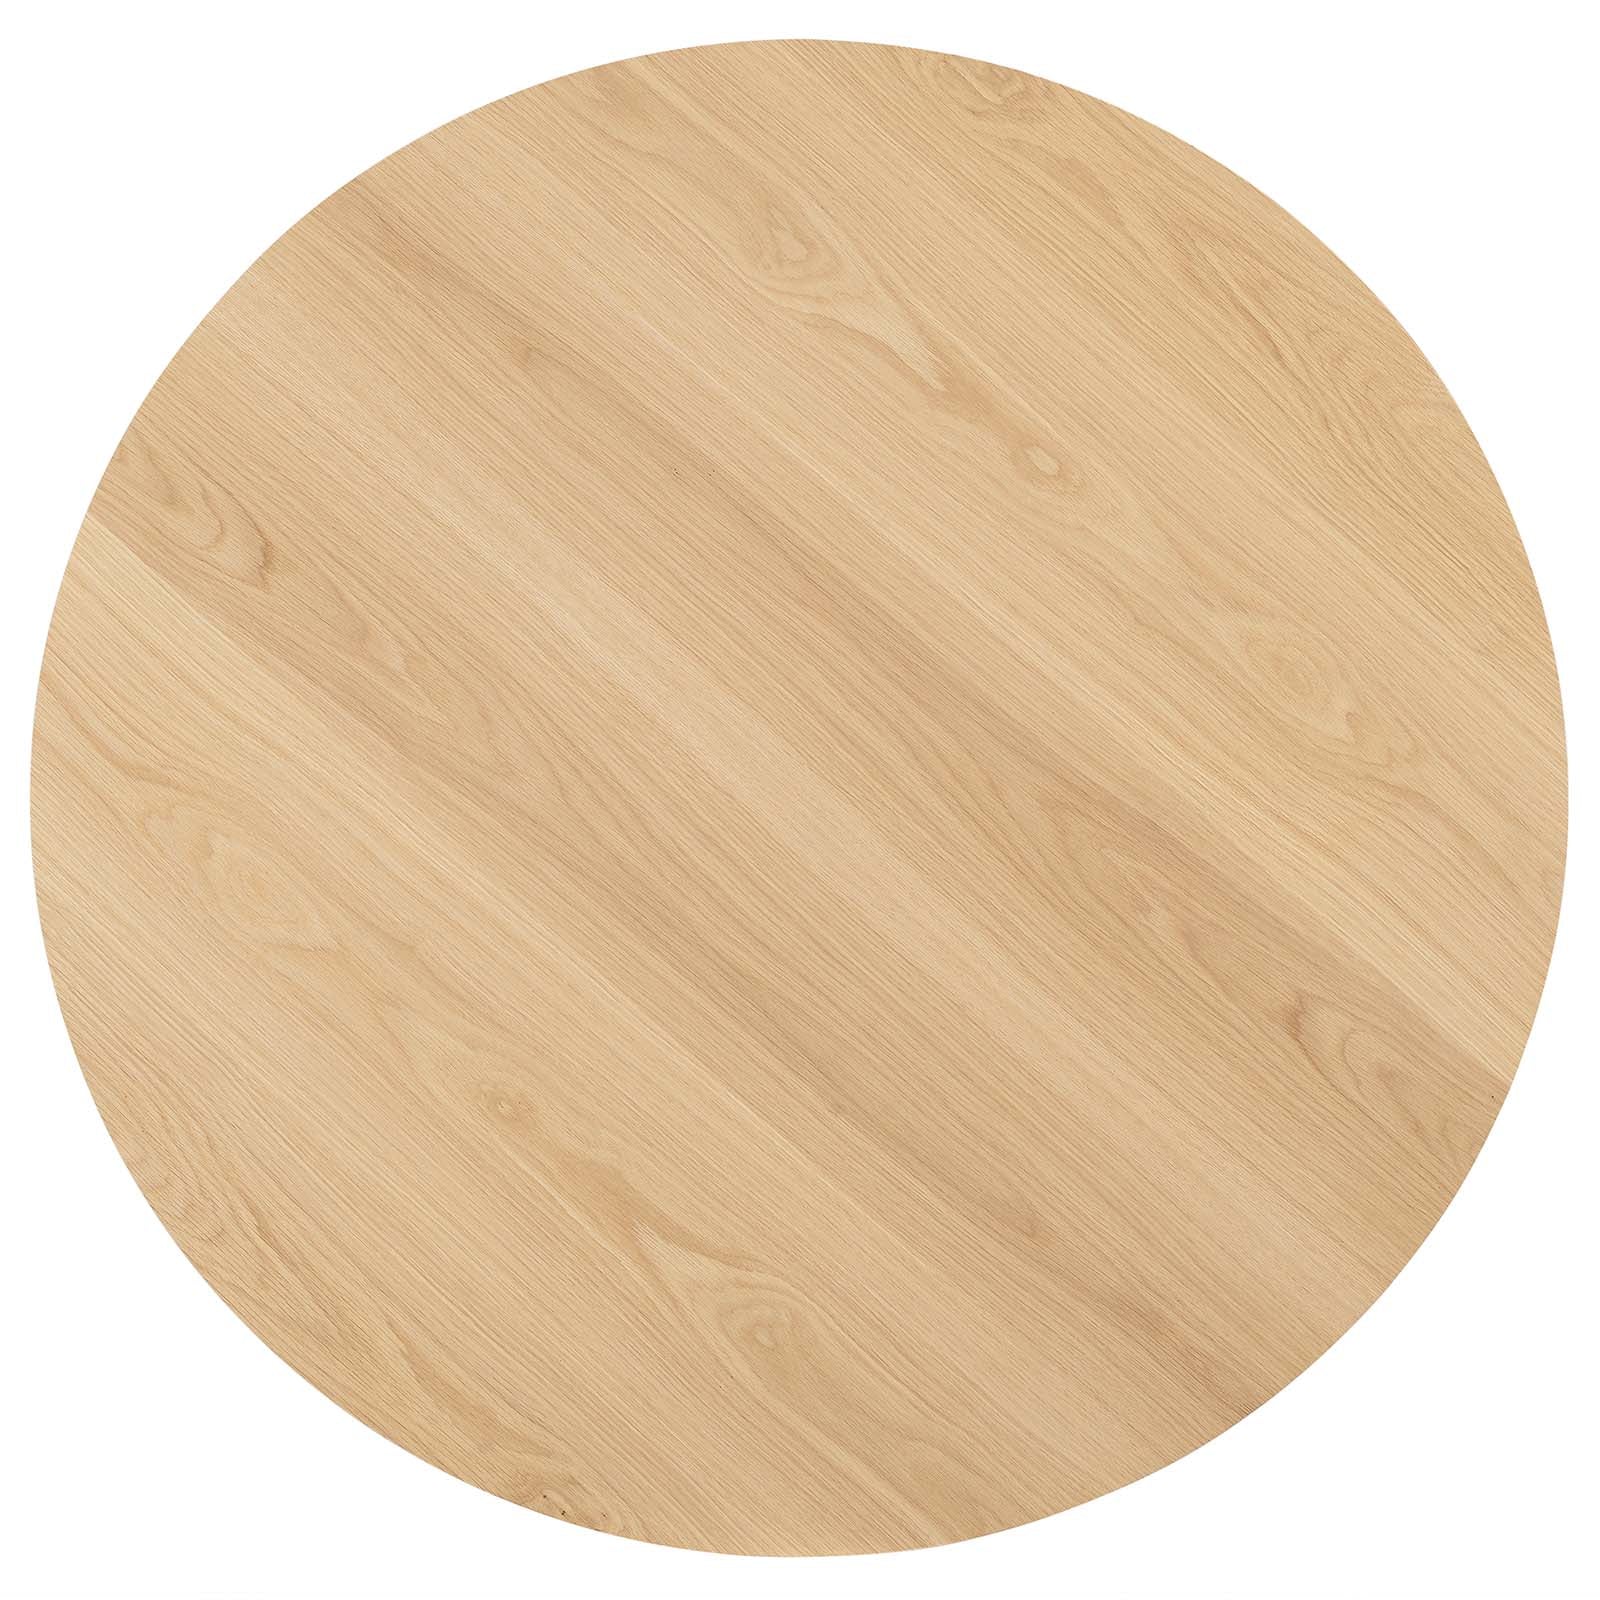 Gallant 47" Round Dining Table-Dining Table-Modway-Wall2Wall Furnishings